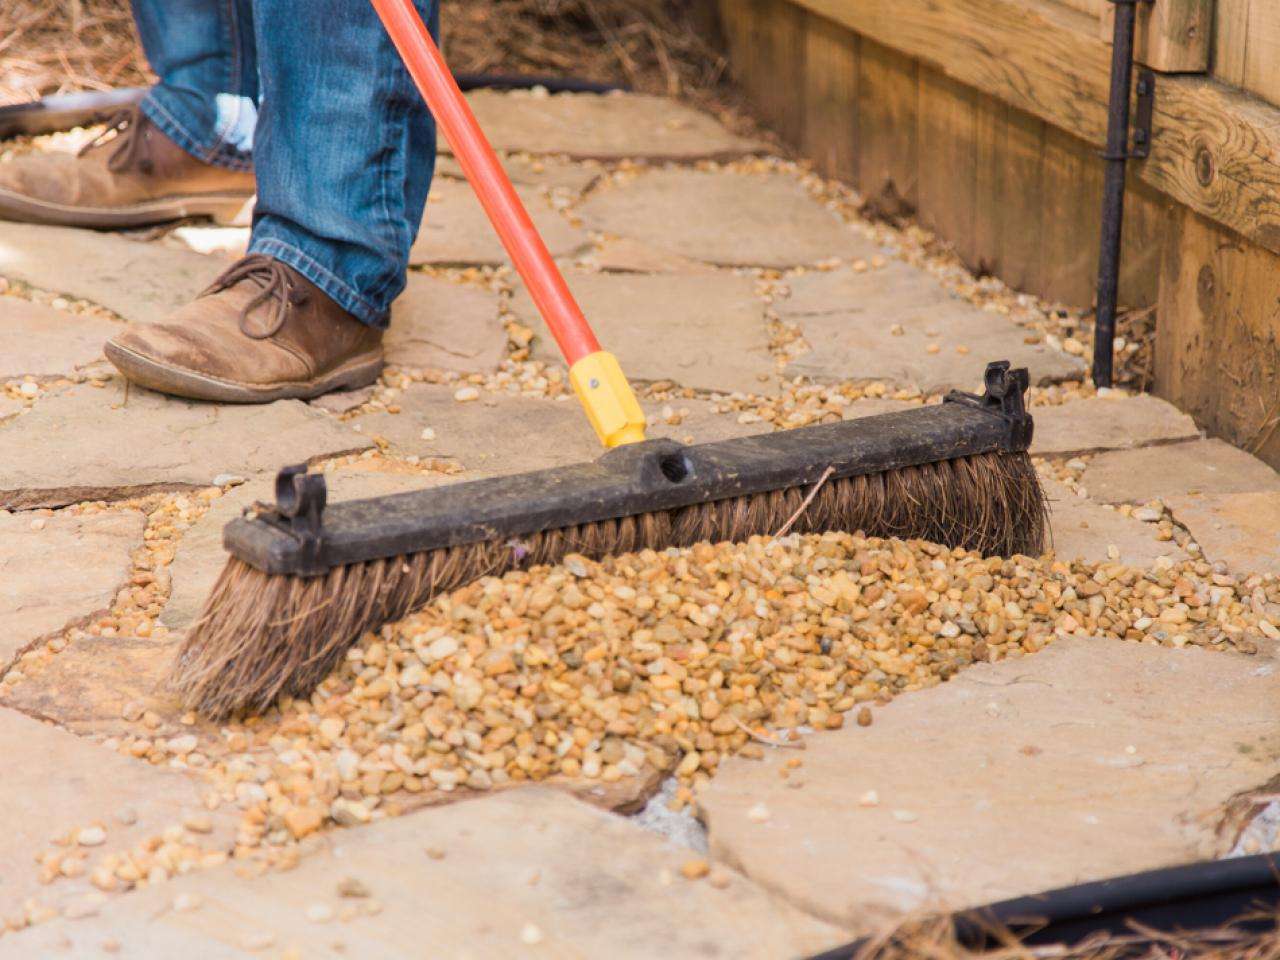 How to Lay a Flagstone Pathway